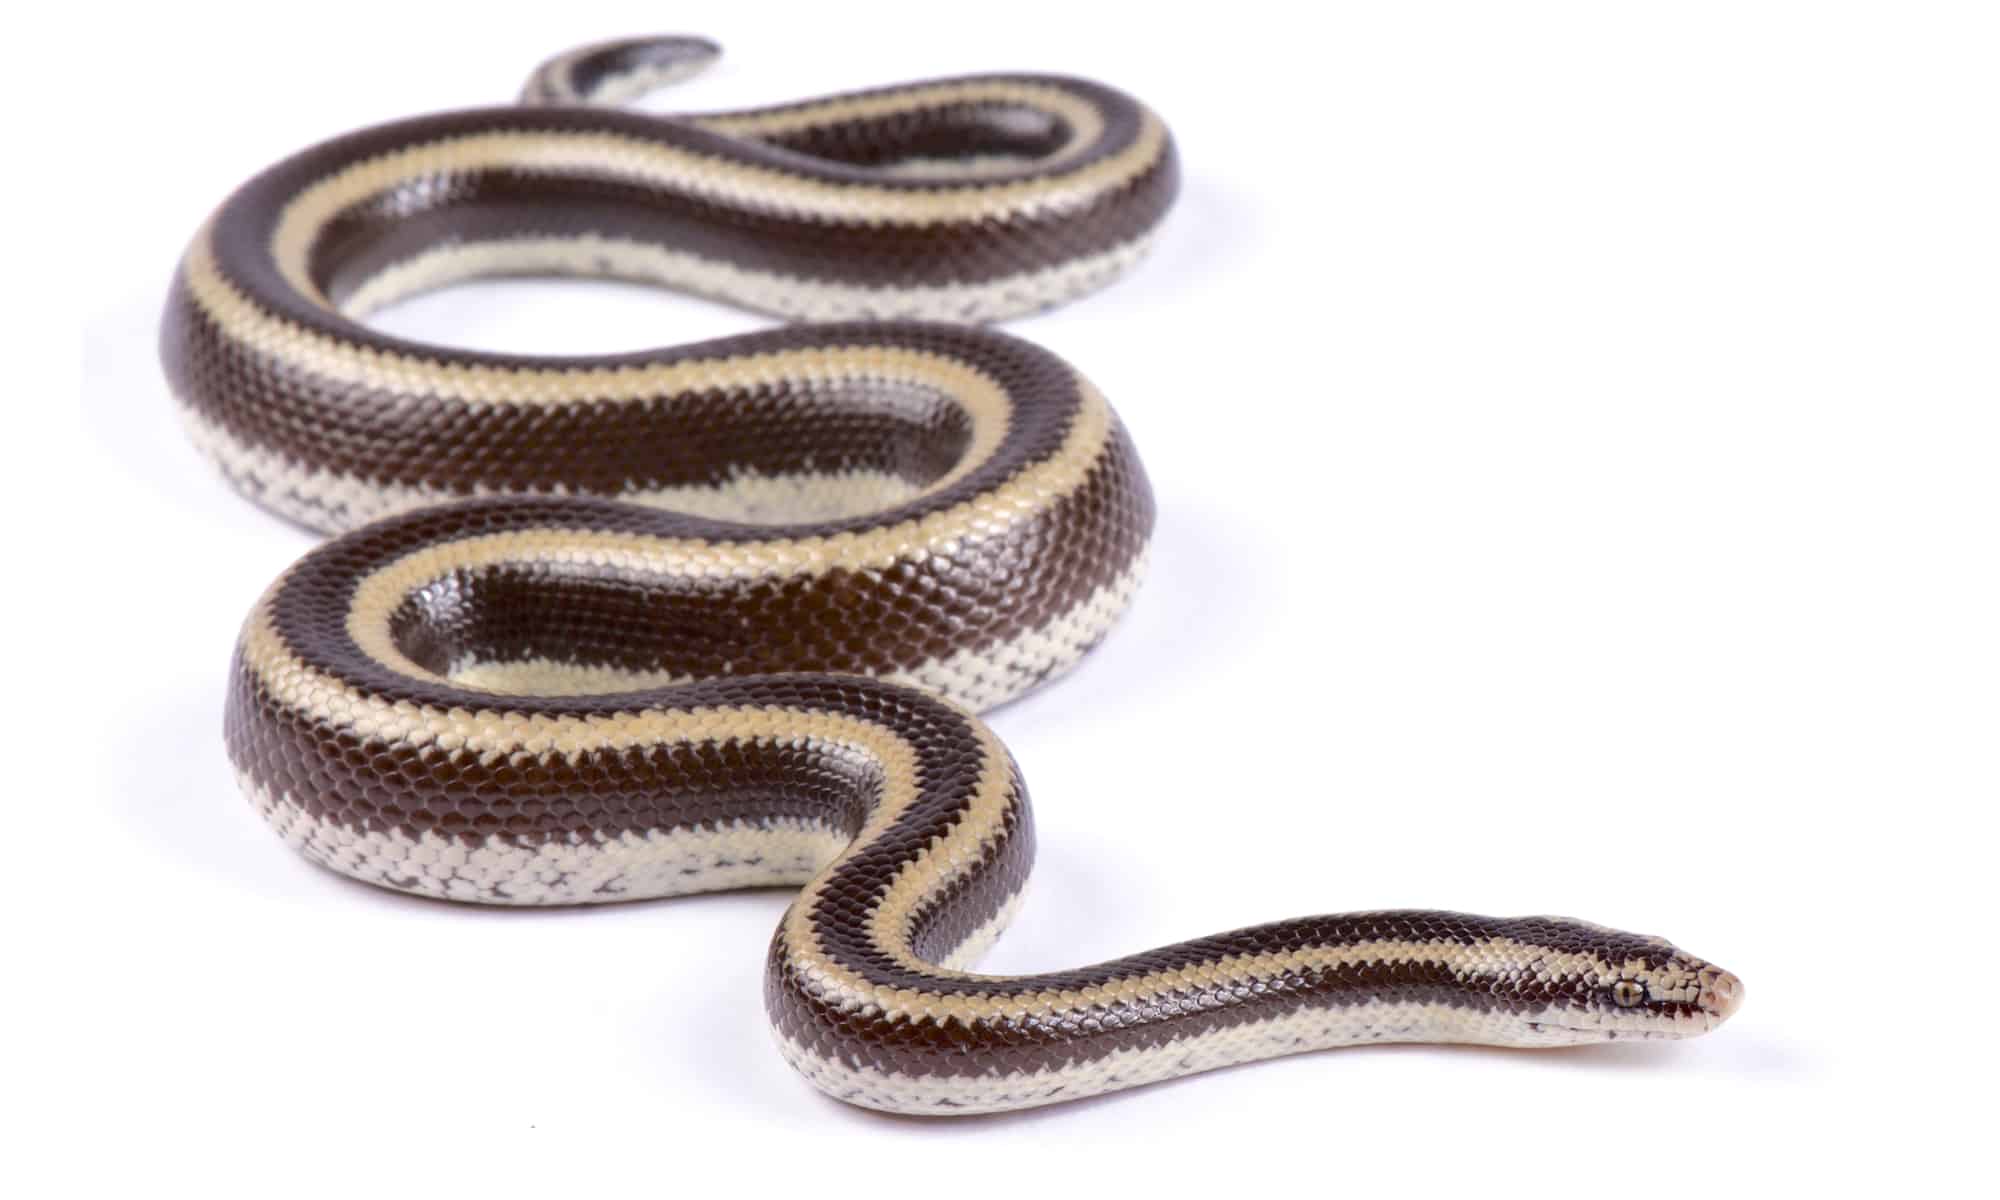 7 Pet Snakes That Stay Small - AZ Animals